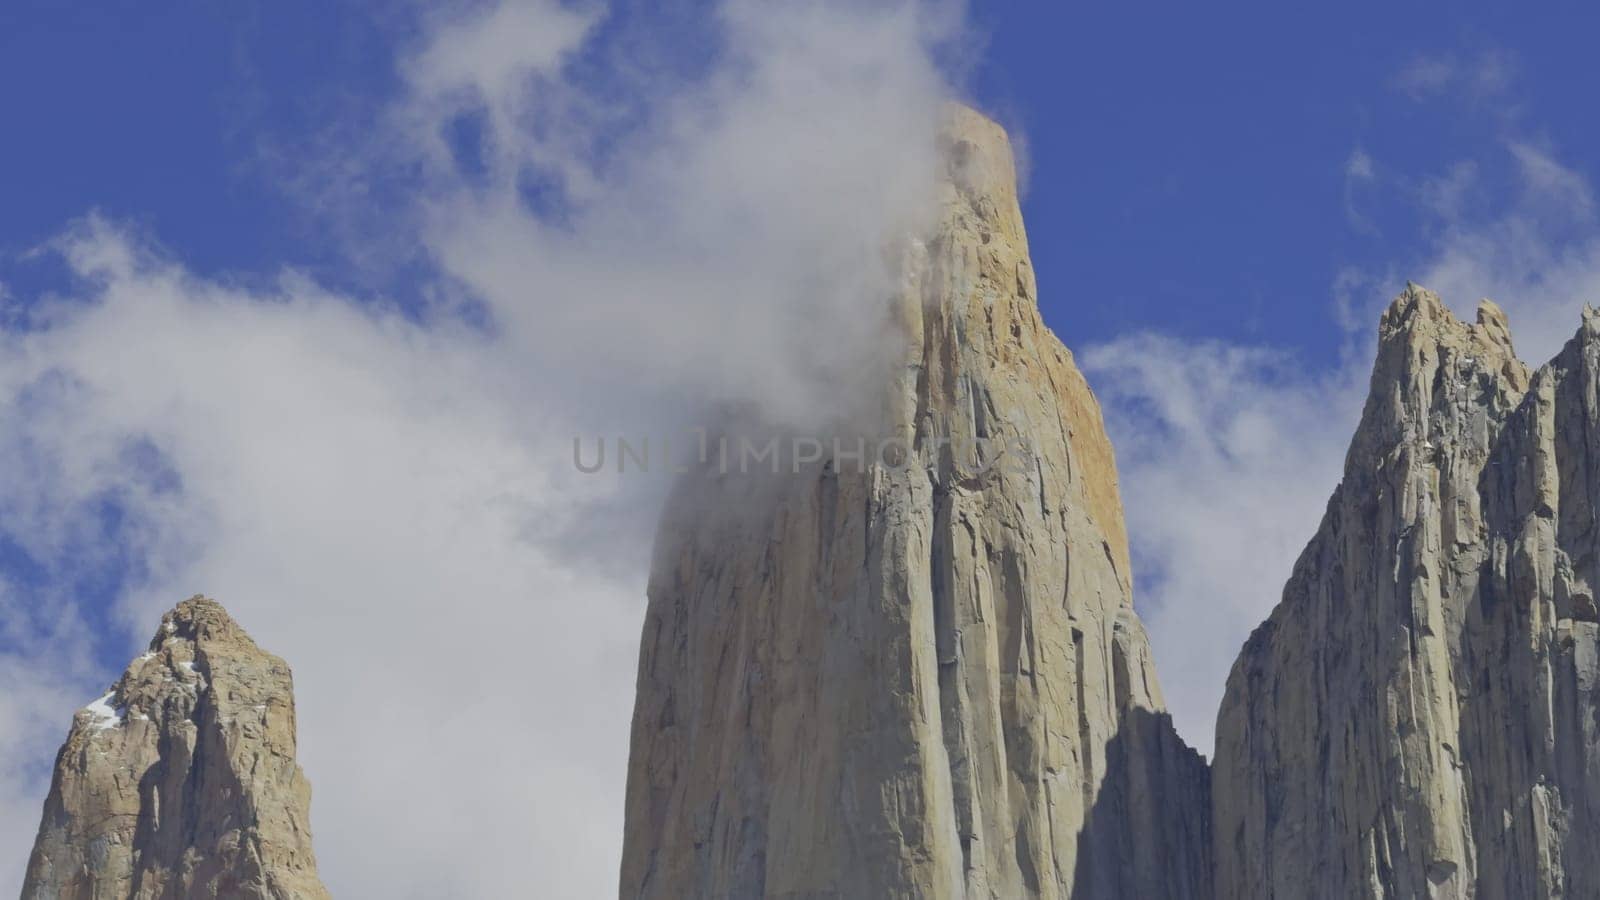 Torres del Paine summit video shows the iconic peaks piercing through clouds above the park.